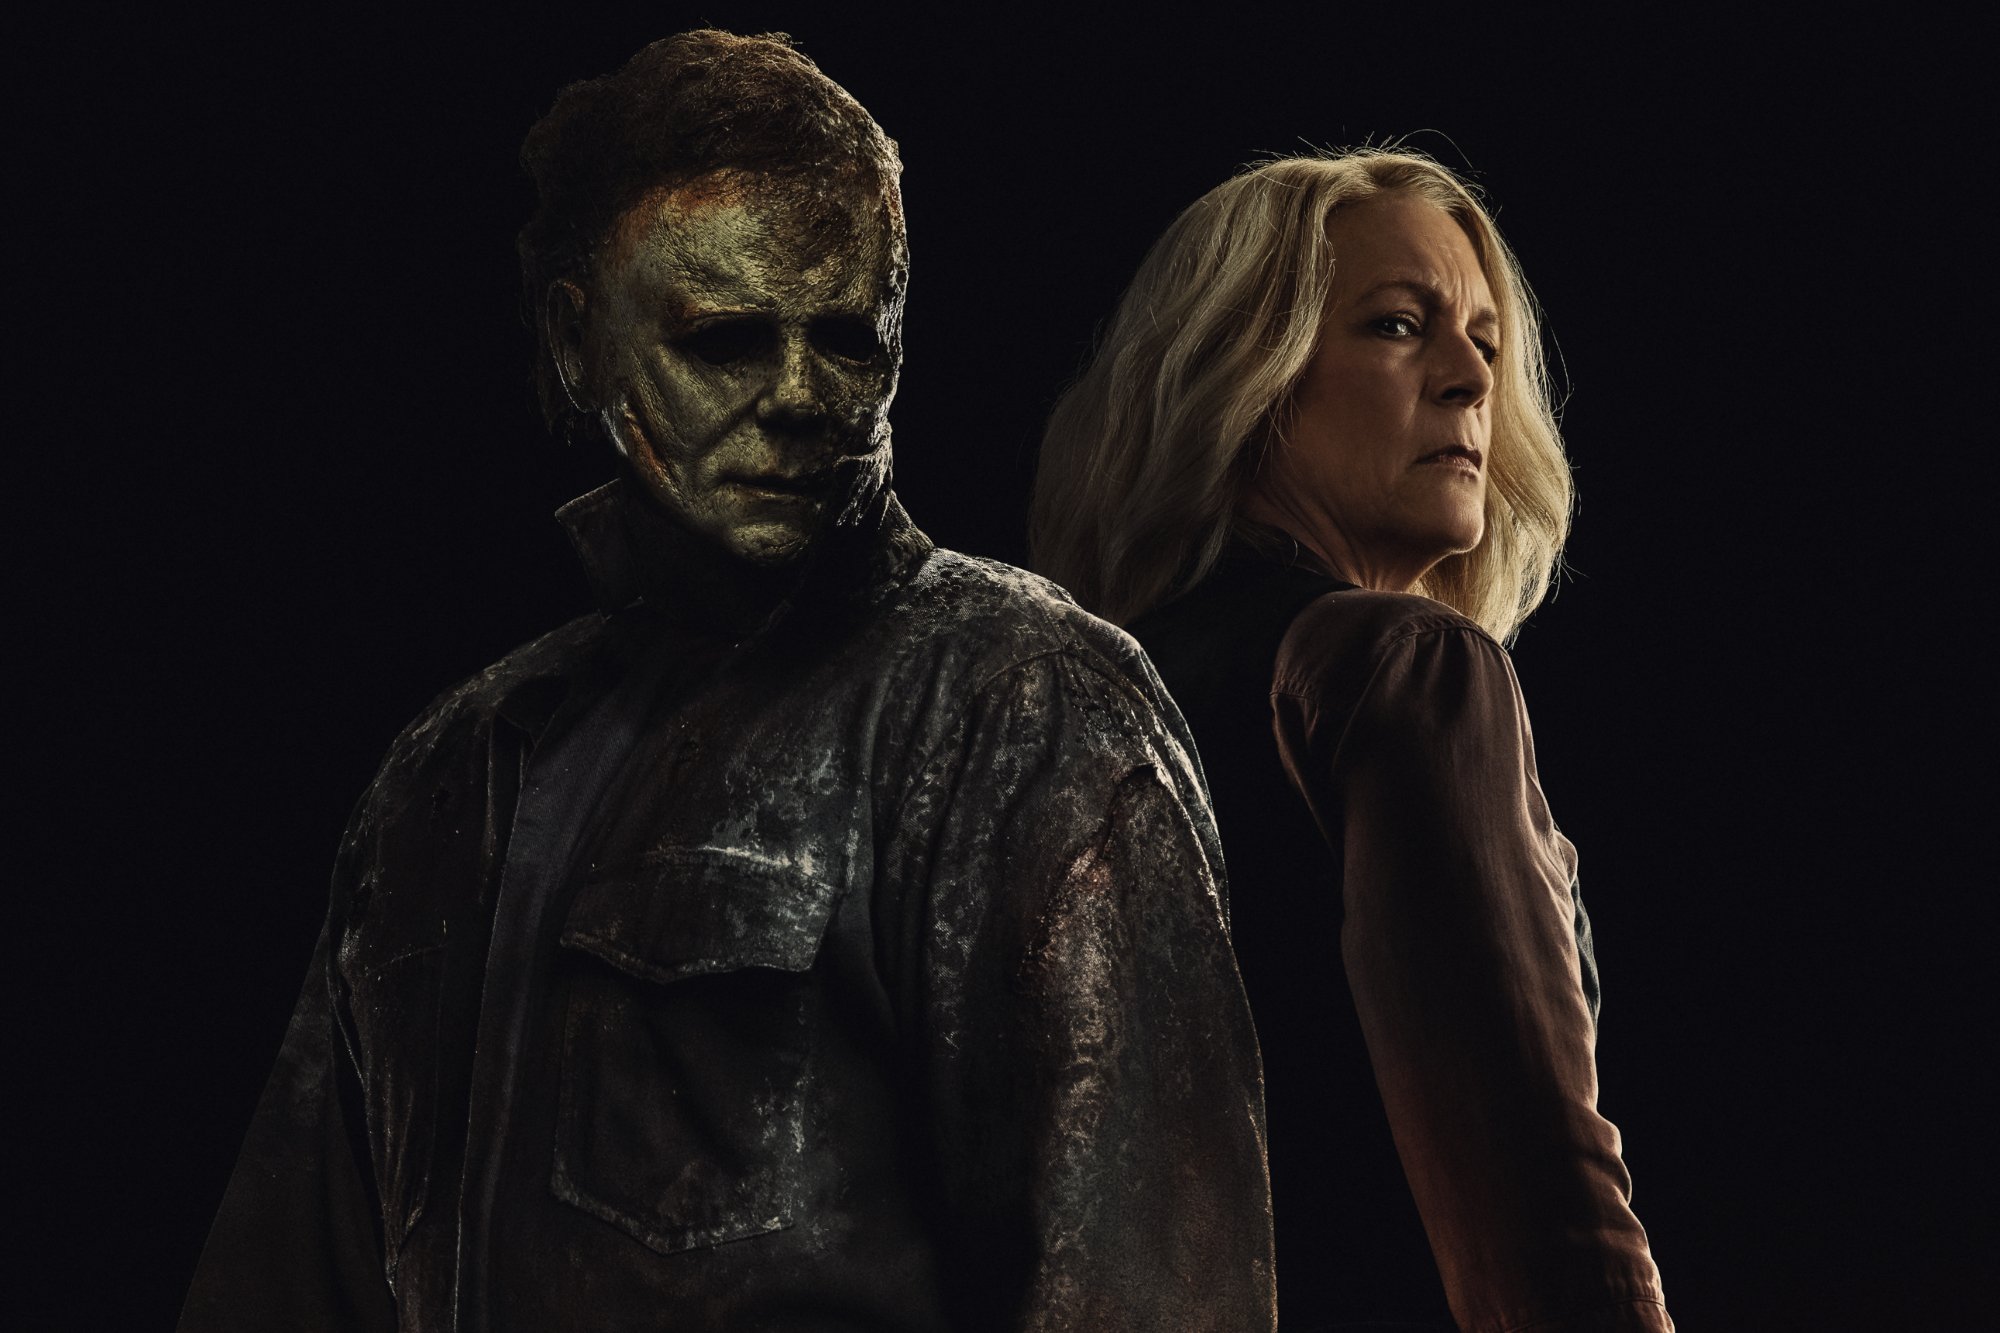 'Halloween Ends' James Jude Courtney as Michael Myers and Jamie Lee Curtis as Laurie Strode in trilogy ending. They're standing back-to-back in front of a black background.